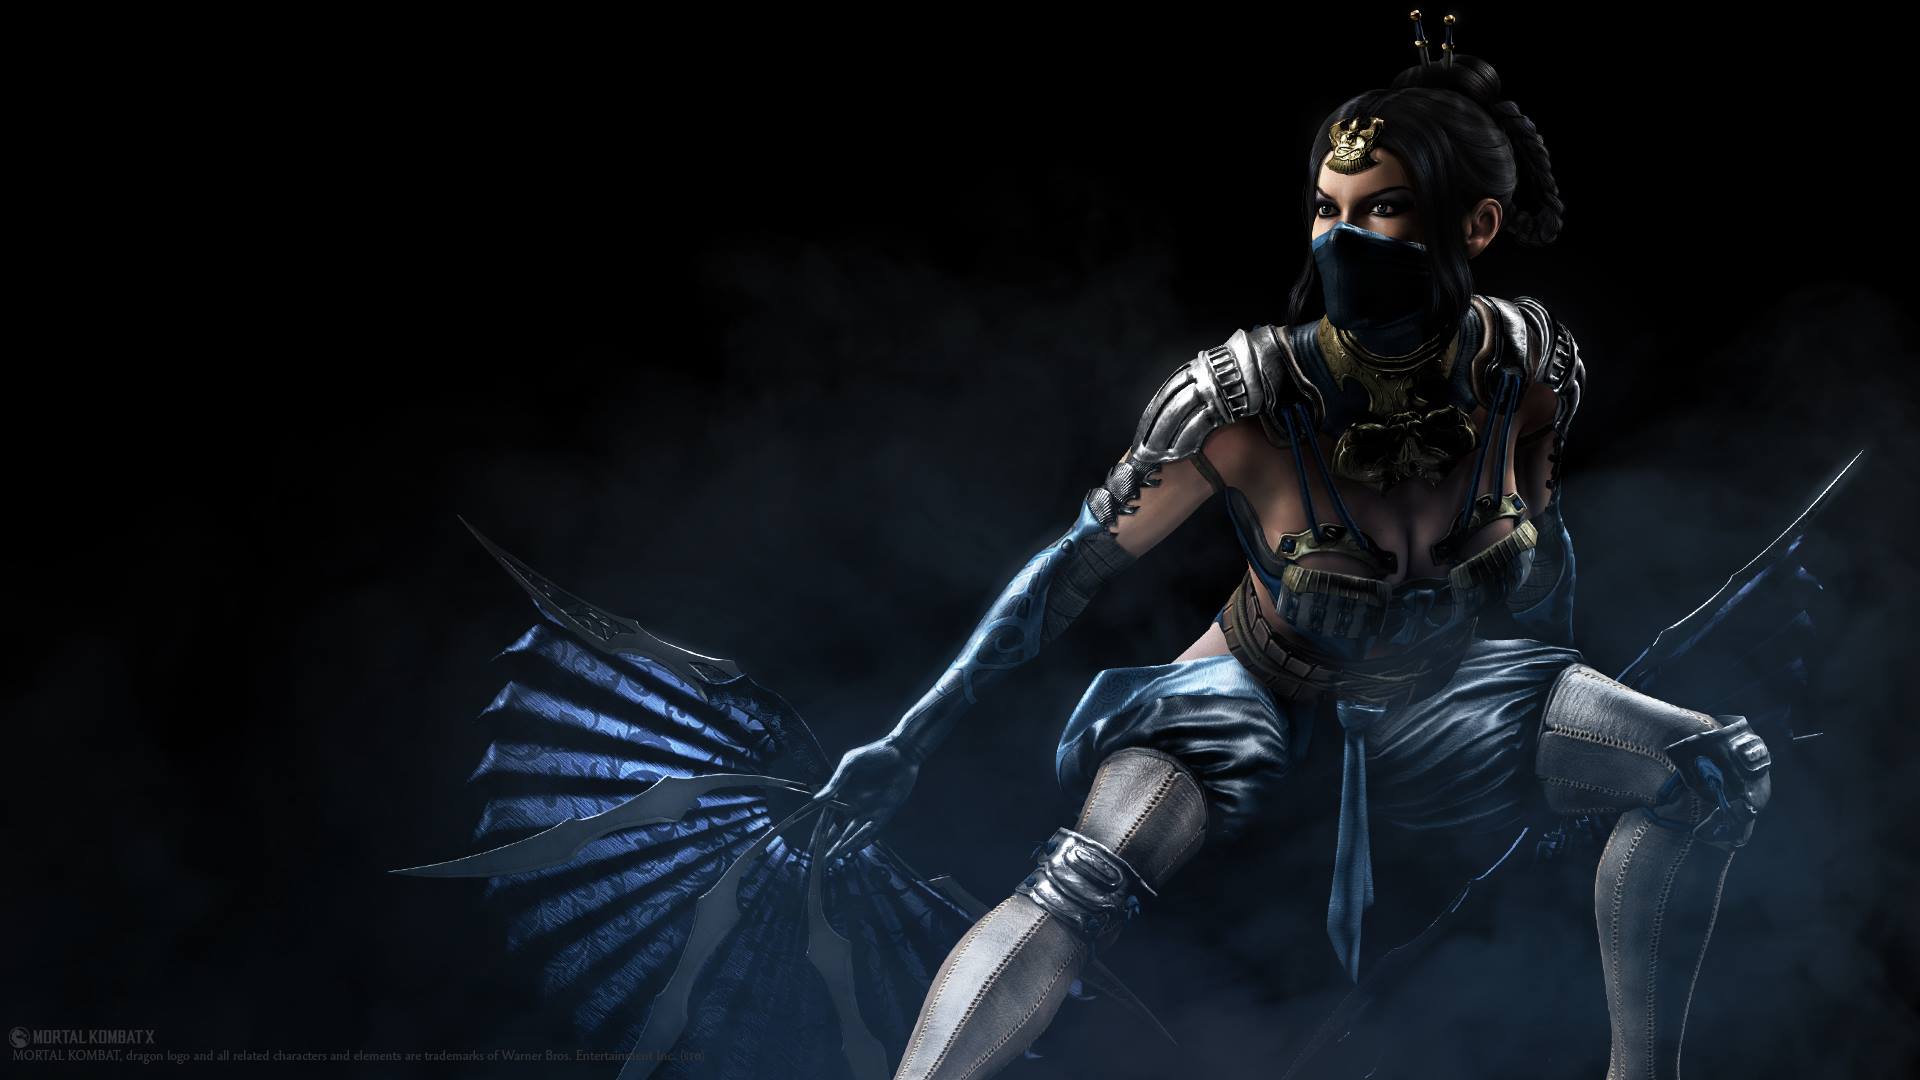 Mortal Kombat X Kitana Character Artwork From Princess to Queen of Outworld